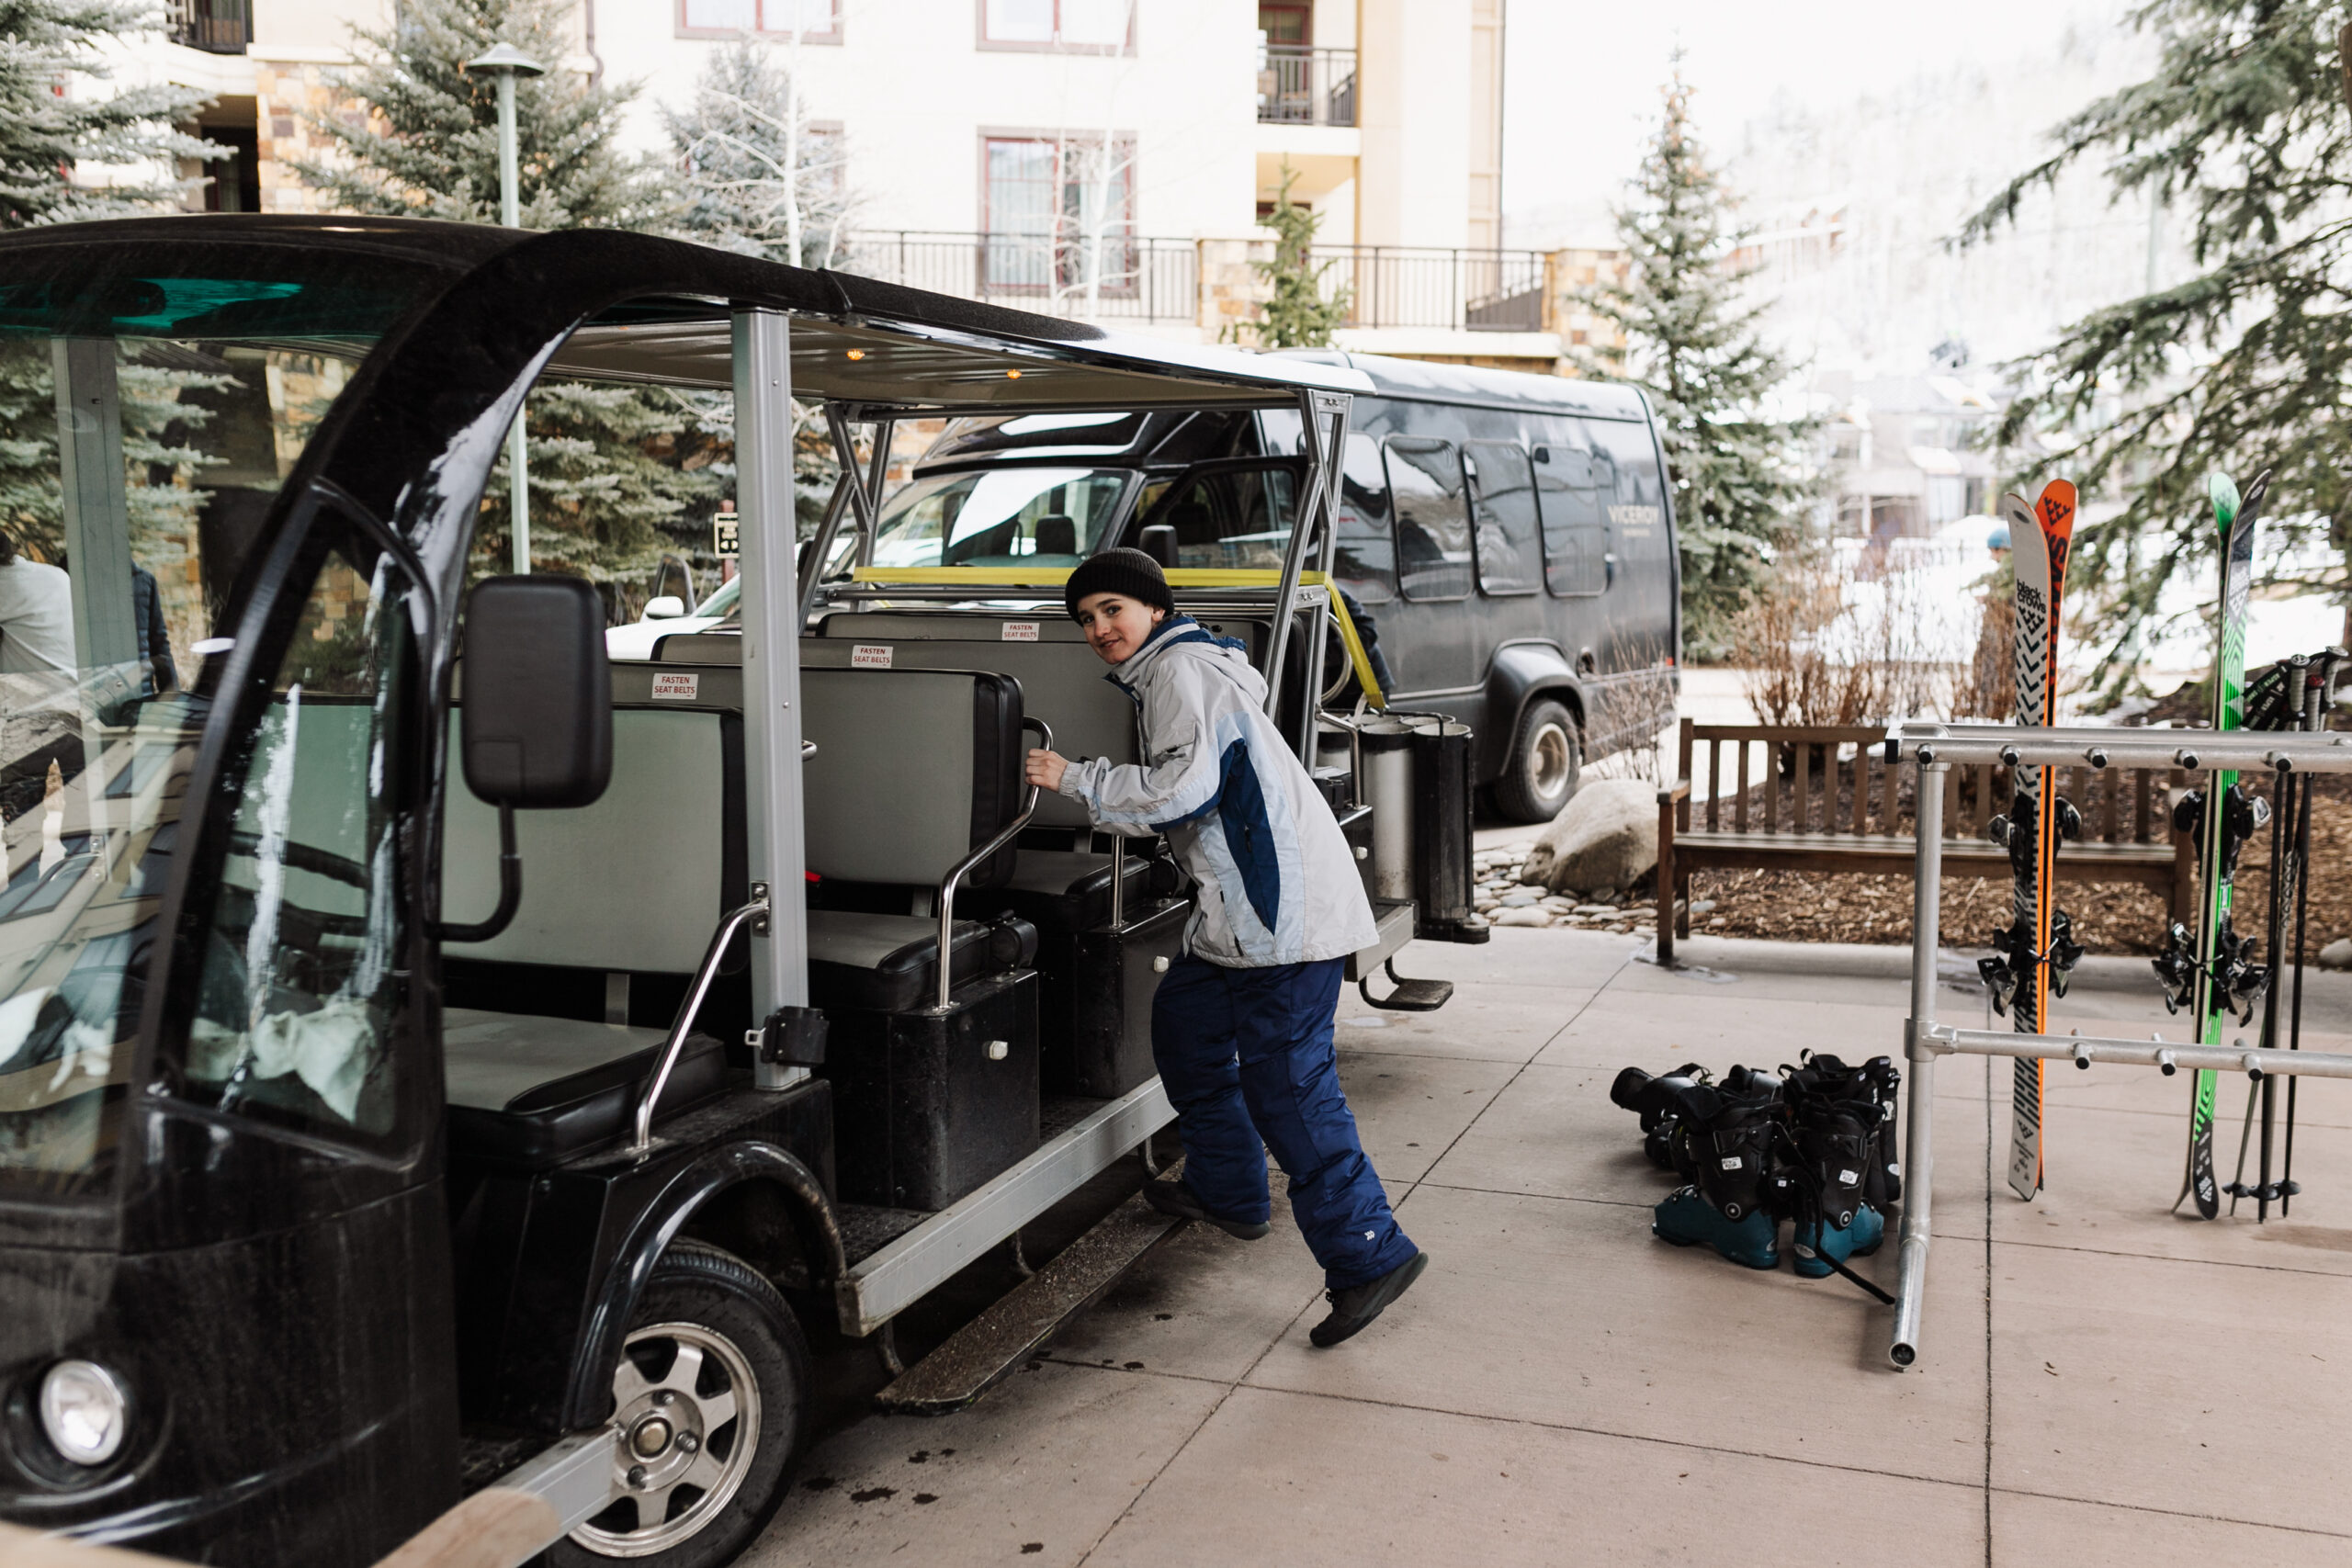 take the "luge" to get anywhere in Snowmass village, if you don't feel like walking! everything is at your fingertips when you stay at the #viceroysnowmass #luxurytravel #skivacation